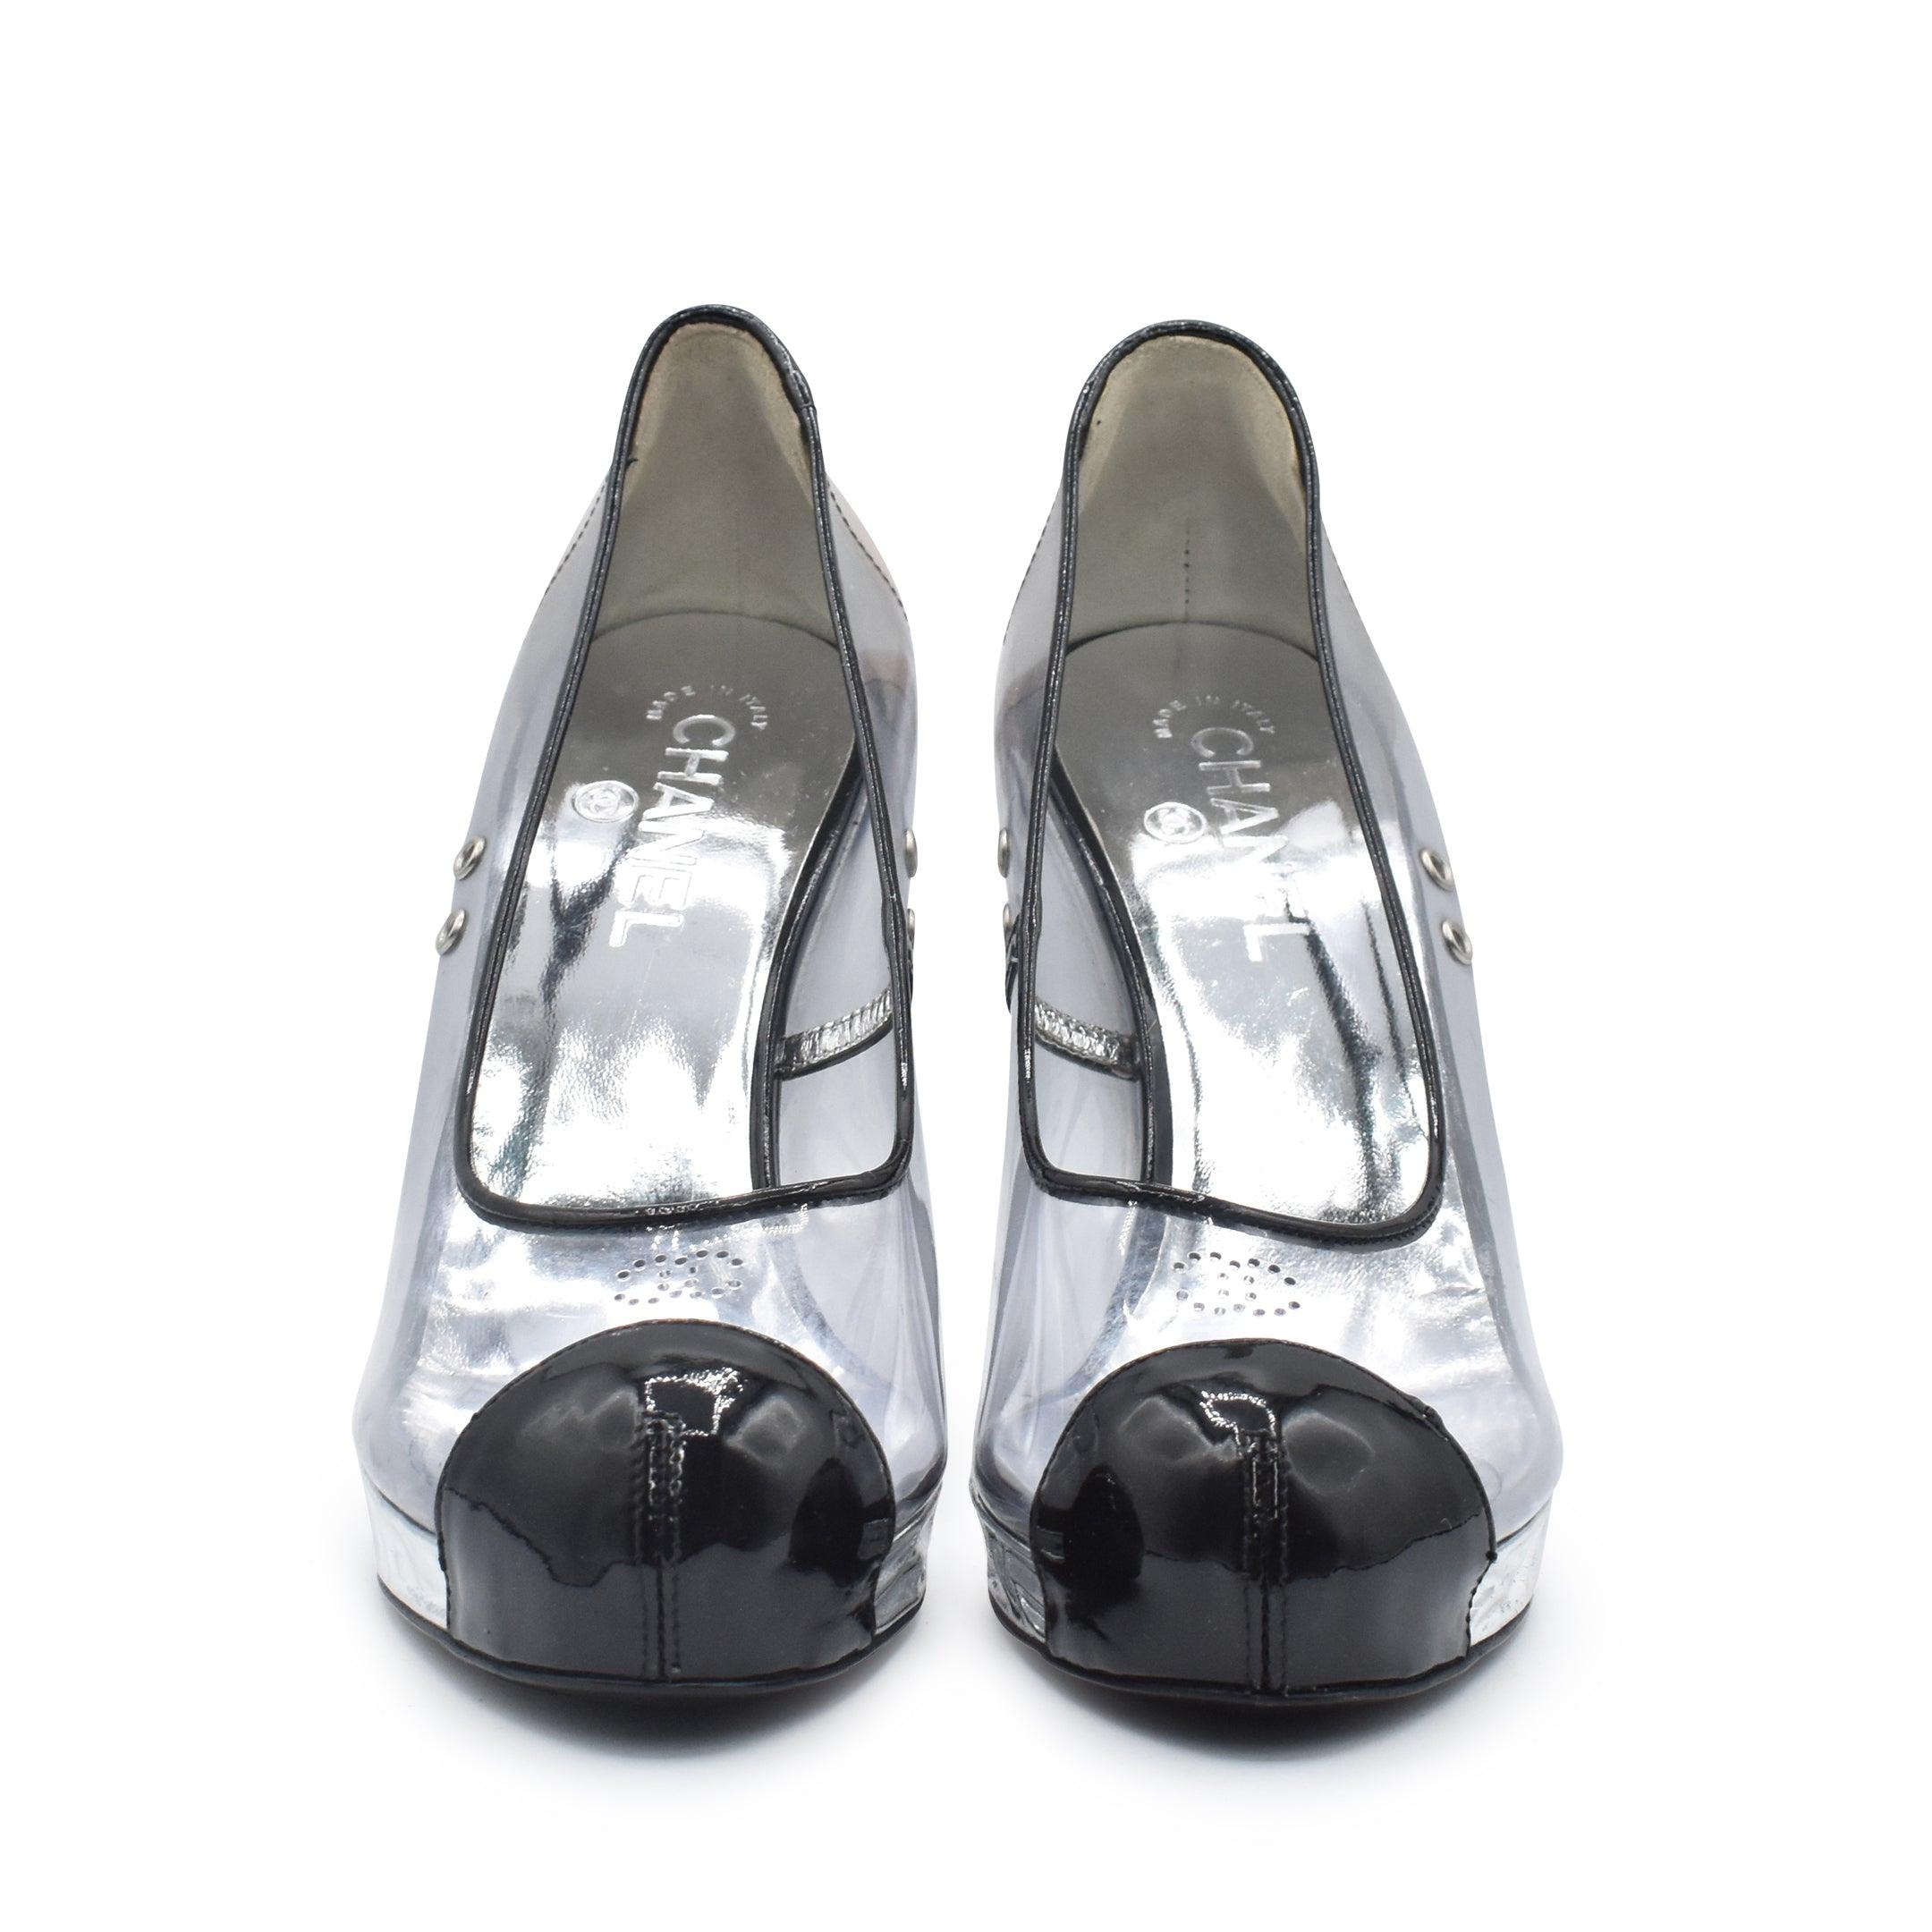 Chanel Iceberg Pumps - Women's 39 - Fashionably Yours